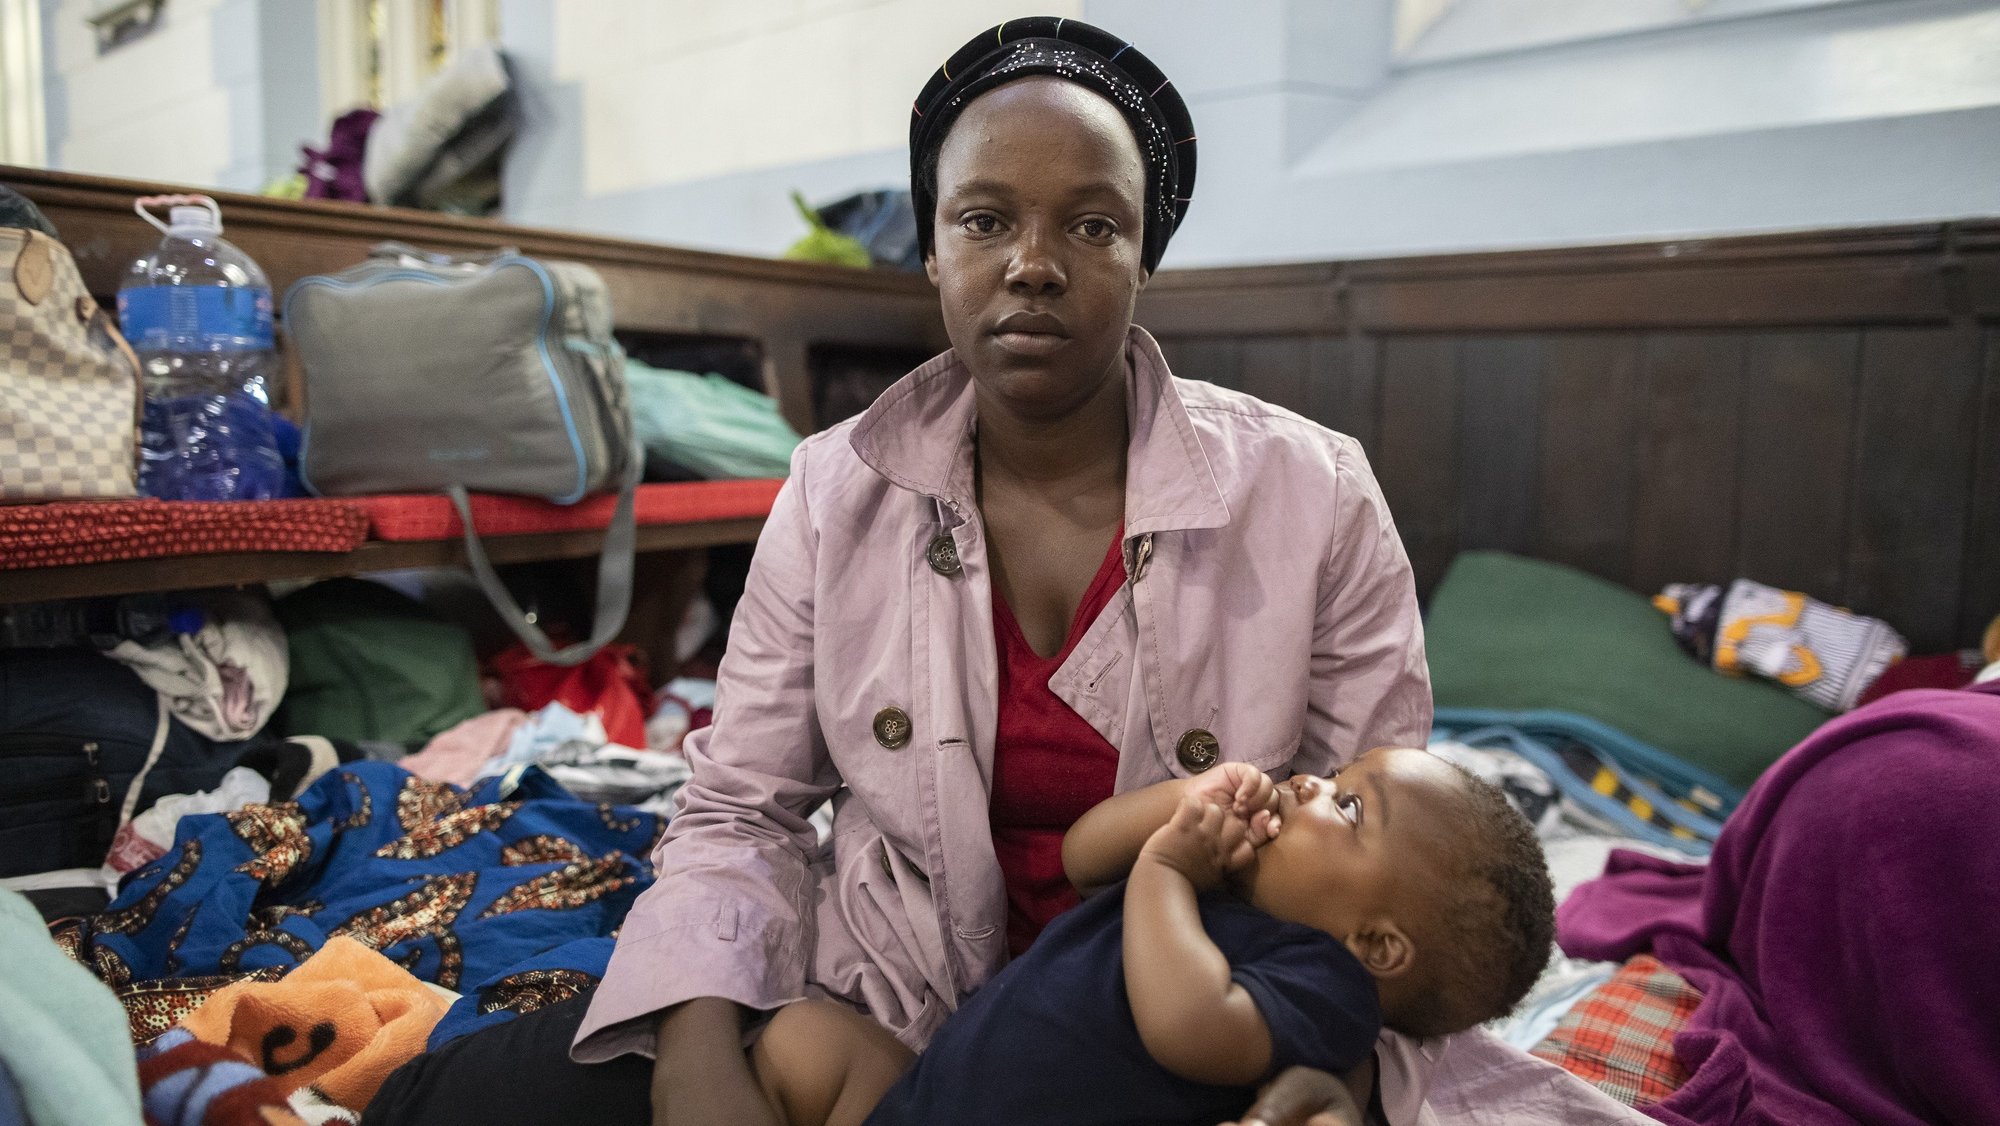 epa08026643 27 year old mother of 3 children Julie Mutosie from  the Democratic Republic of Congo (DRC) poses for a photograph inside Central Methodist Church, Cape Town, South Africa, 26 November 2019. Following weeks of taking refuge in Central Methodist Church there is still no resolution for the refugees with authorities. The hundreds of foreign nationals taking refuge inside Central Methodist Church are preparing to leave by foot for another country. Police forcefully removed the group from an office block they occupied weeks ago as part of a sit in protest at the United Nations High Commission for Refugees (UNHCR) before the group moved to the church. The Foreign Nationals site fears over xenophobic attacks and fear for their safety in South Africa with similar protests by African foreign nationals occurring in Pretoria. Community leaders complain the UNHCR is doing nothing to help them. Four teenagers who were among the group of refugees died by drowning on 24 November after they tried to have a swim at a nearby beach.  EPA/NIC BOTHMA ATTENTION: This Image is part of a PHOTO SET